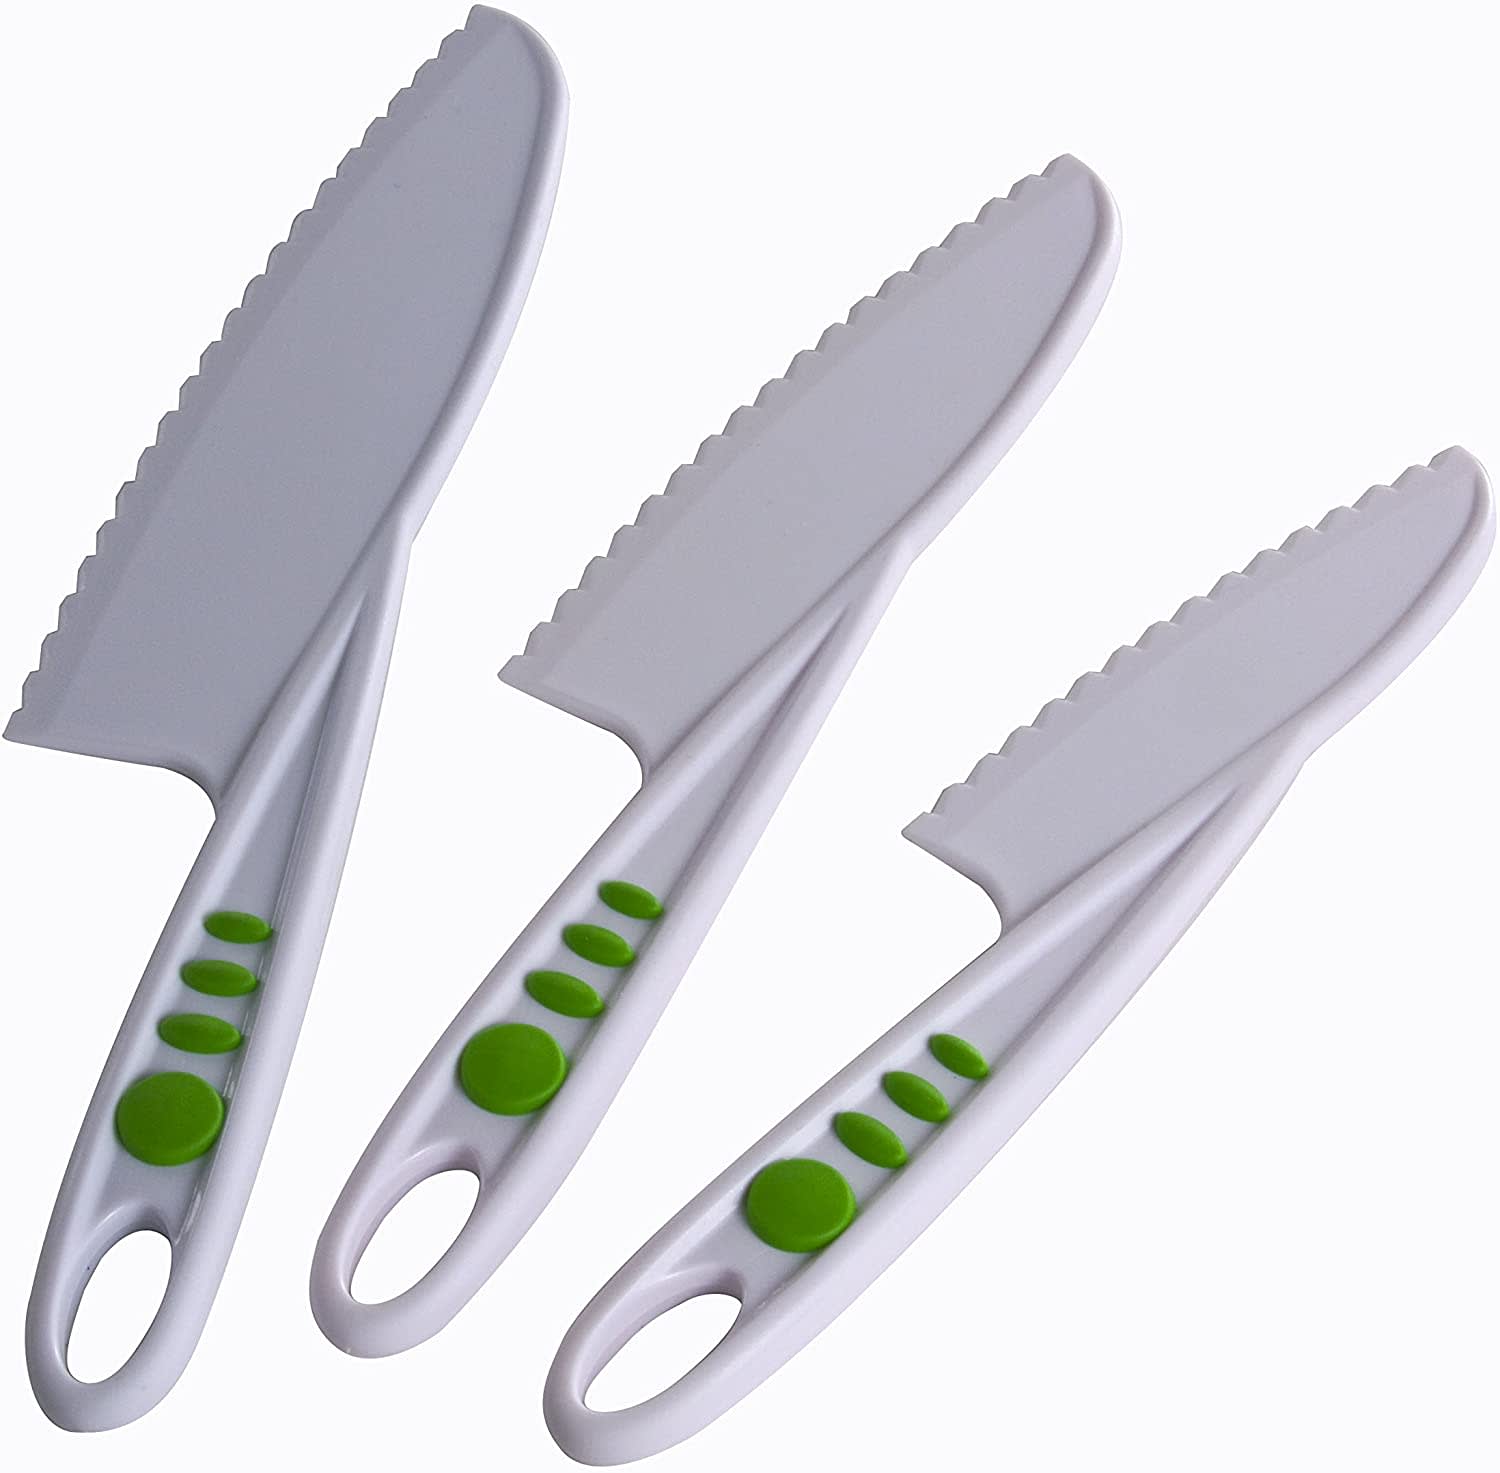 Kid-Friendly Kitchen Knives, Cookware & Gadgets to Get Kids Cooking